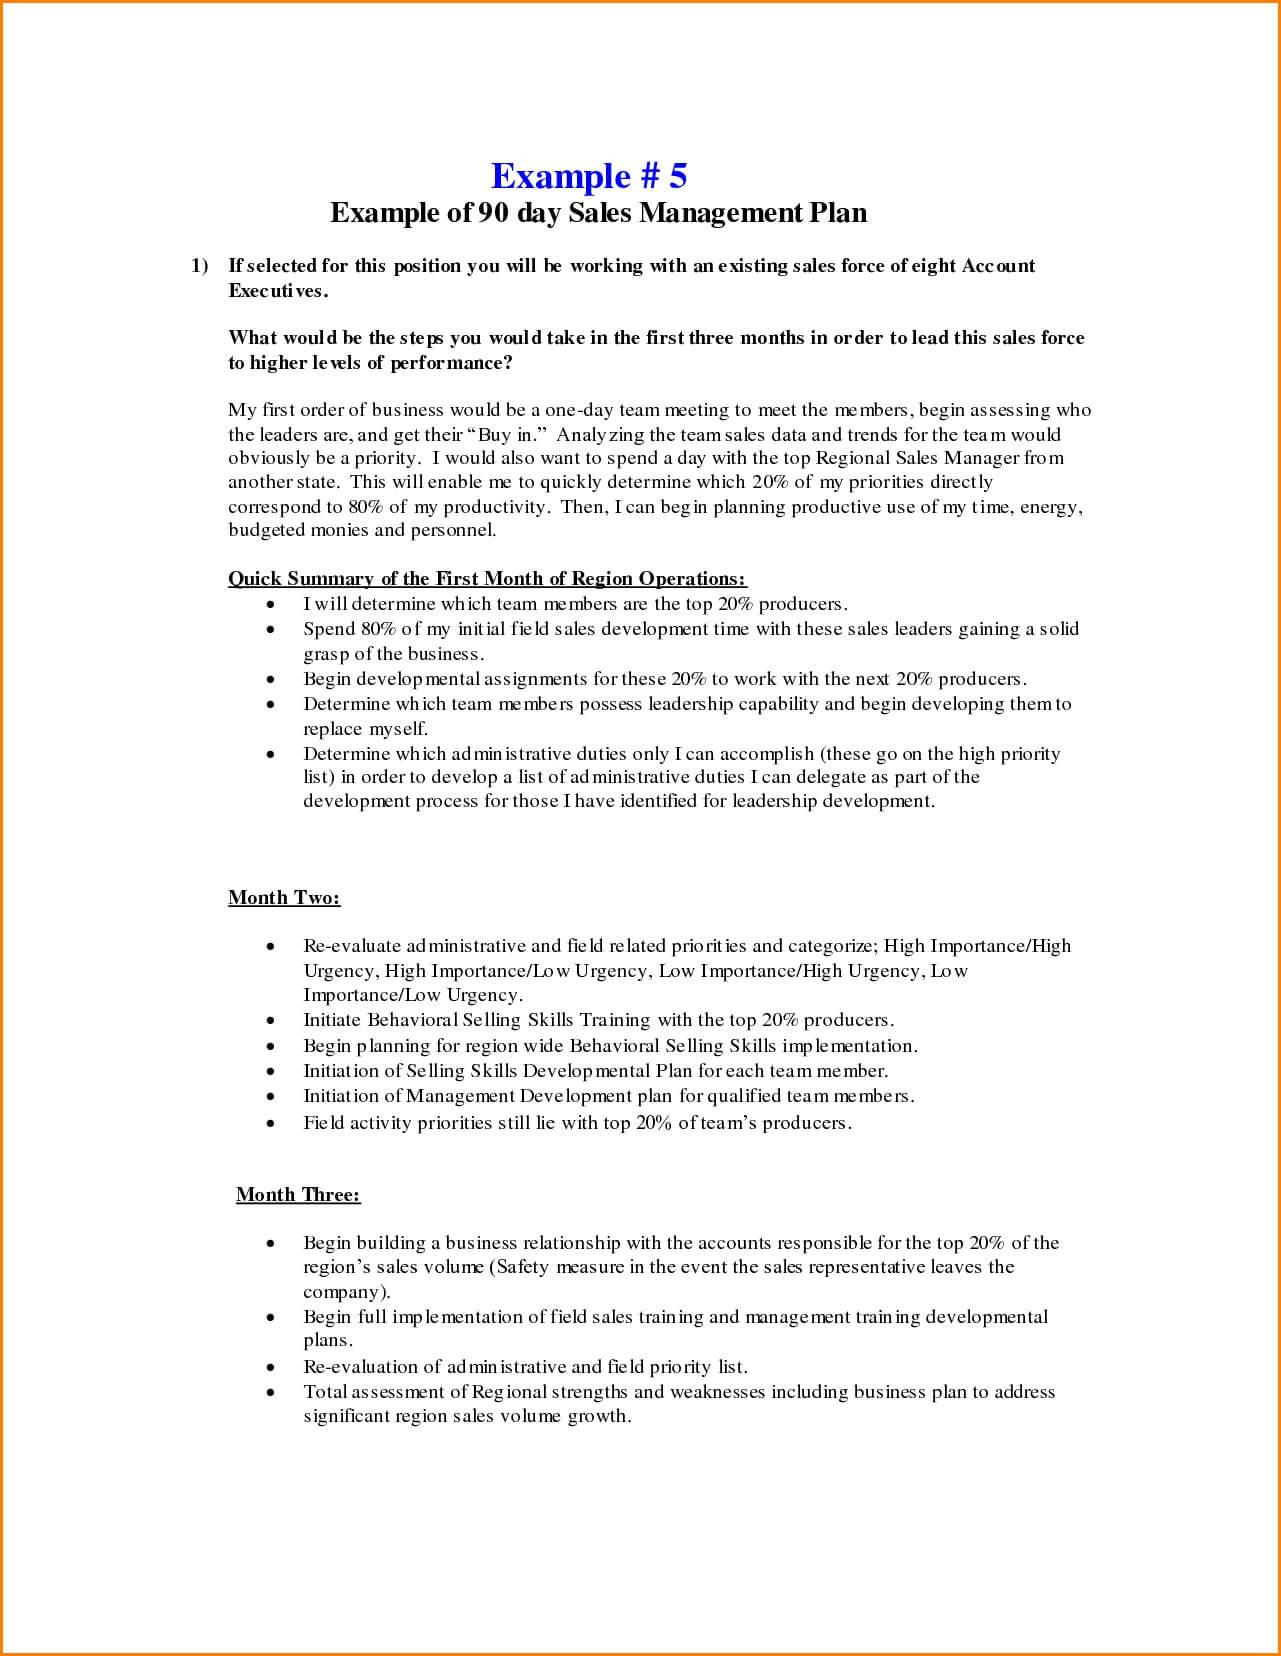 Day Sales Management Plan Plans How To Write For Your Job Inside 30 60 90 Day Sales Management Plan Template